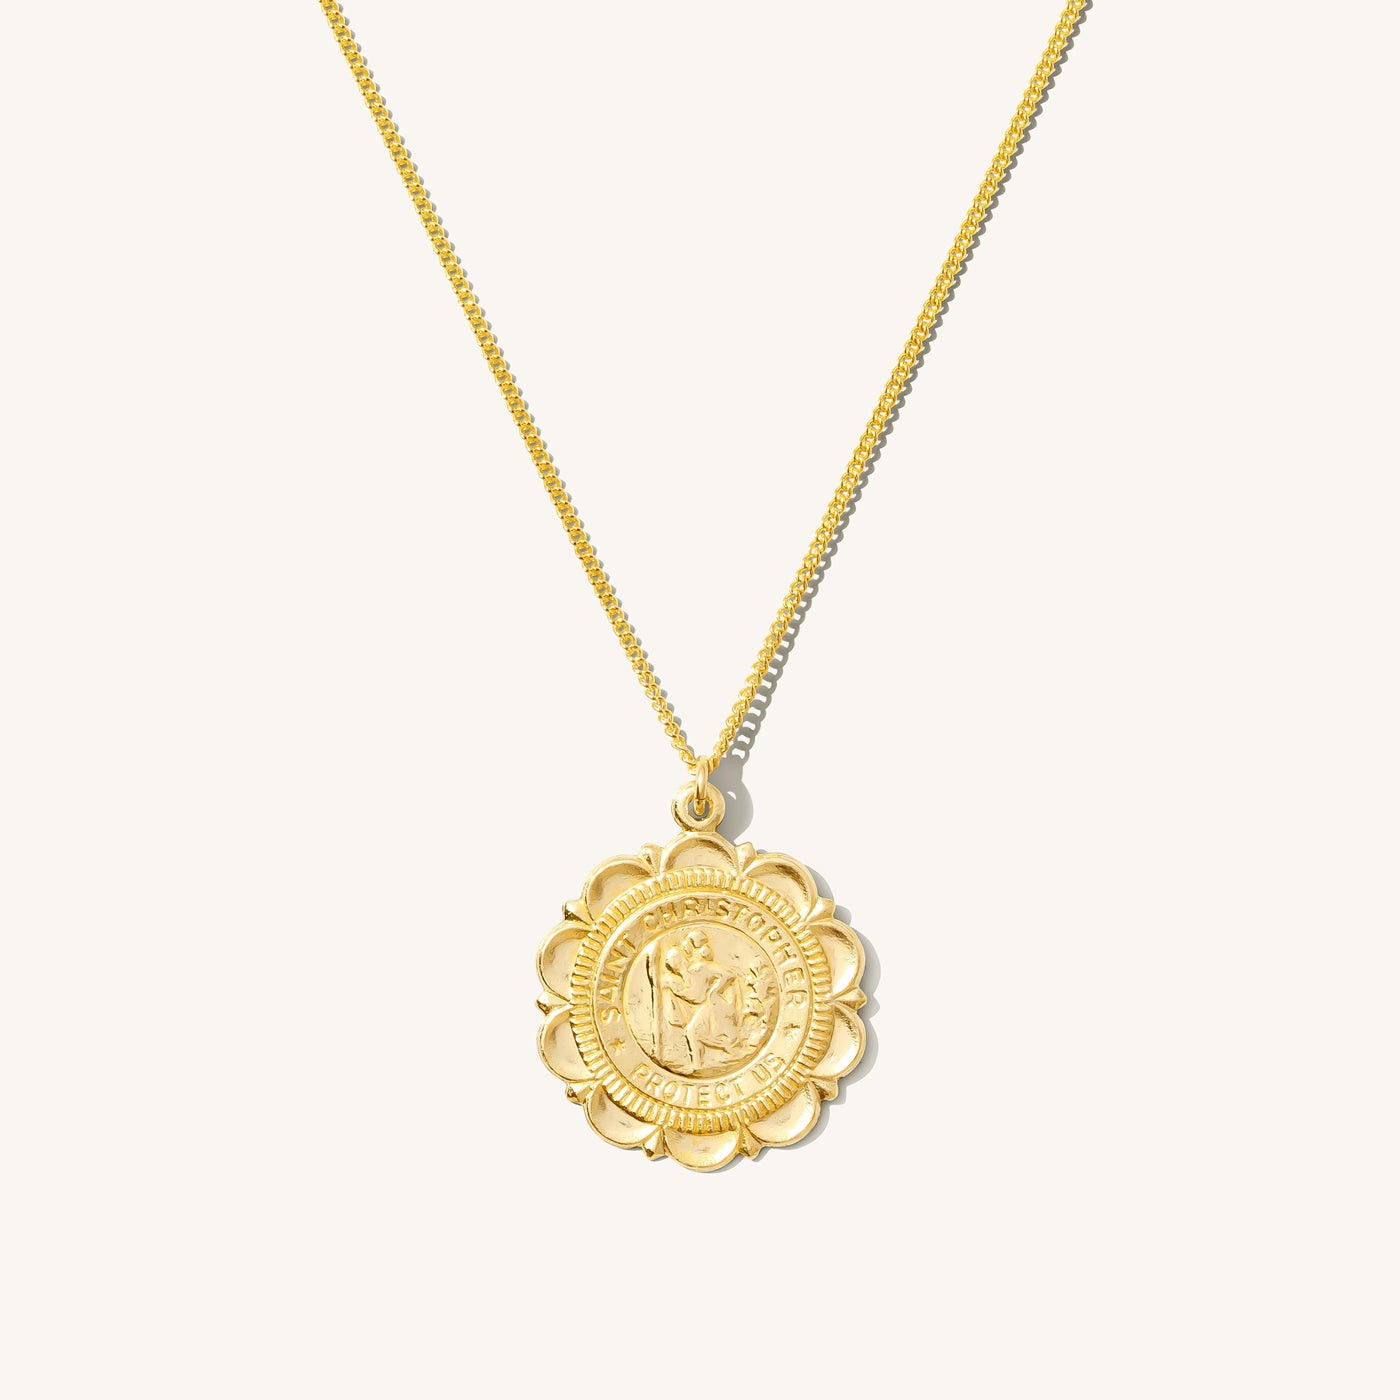 Traveler's Coin Necklace | Simple & Dainty Jewelry